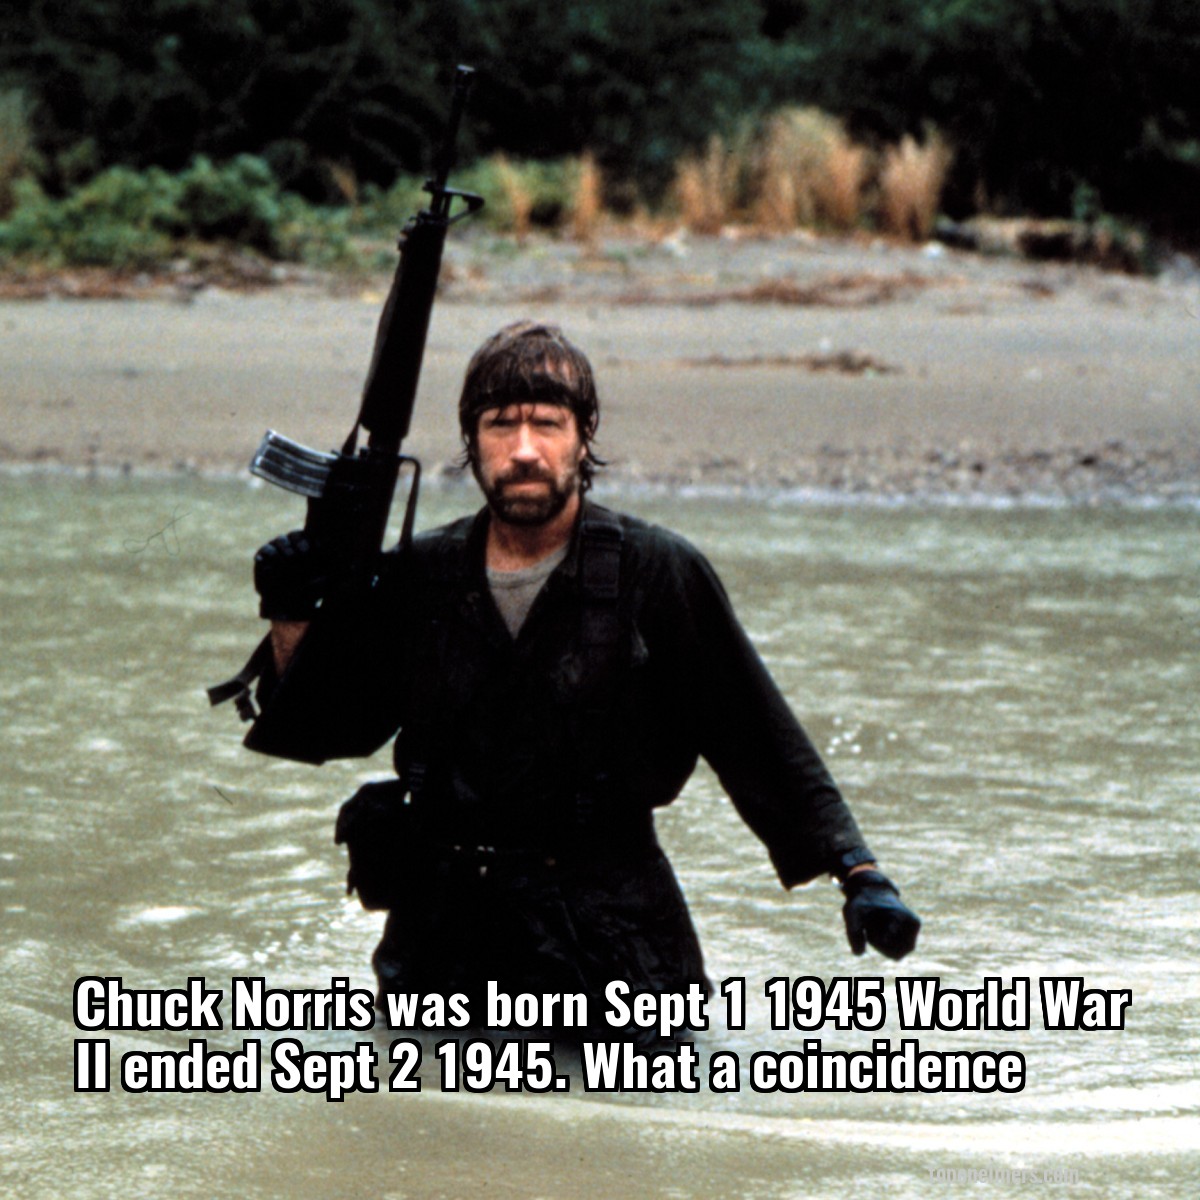 Chuck Norris was born Sept 1 1945 World War II ended Sept 2 1945. What a coincidence